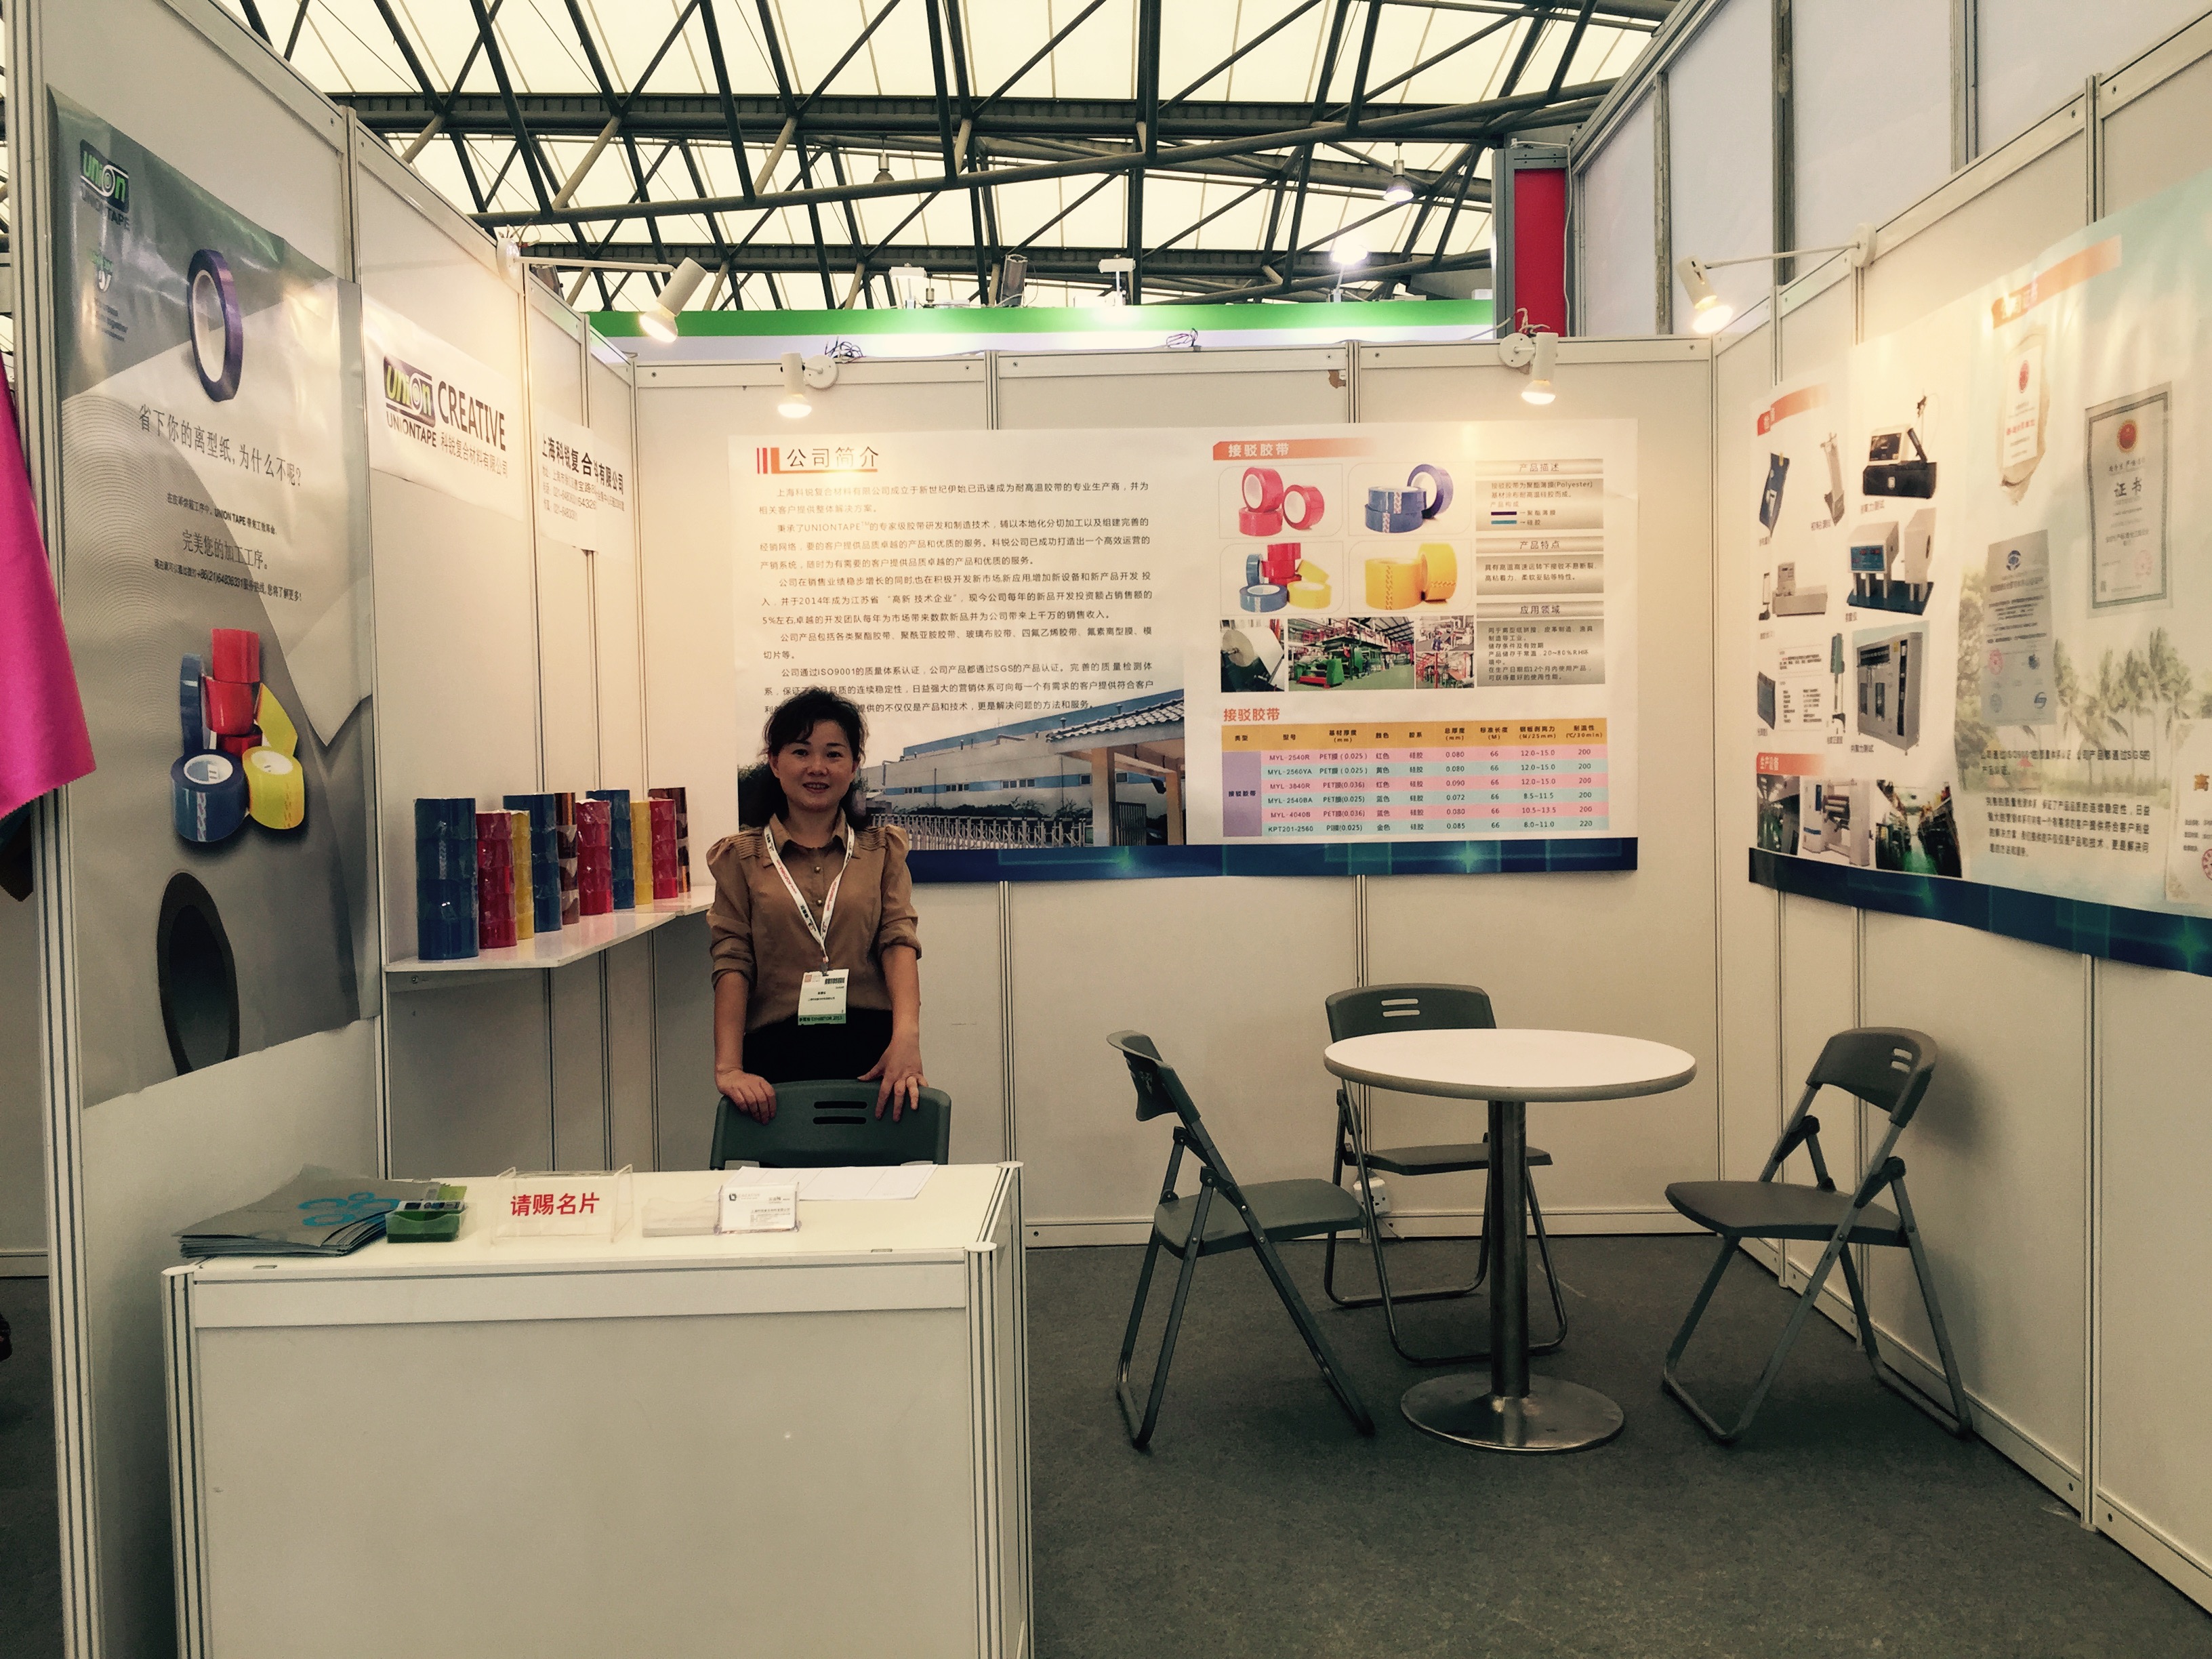 A successful ACLE 2015 Show (Synthetic leather show for promoting our splicing tape)